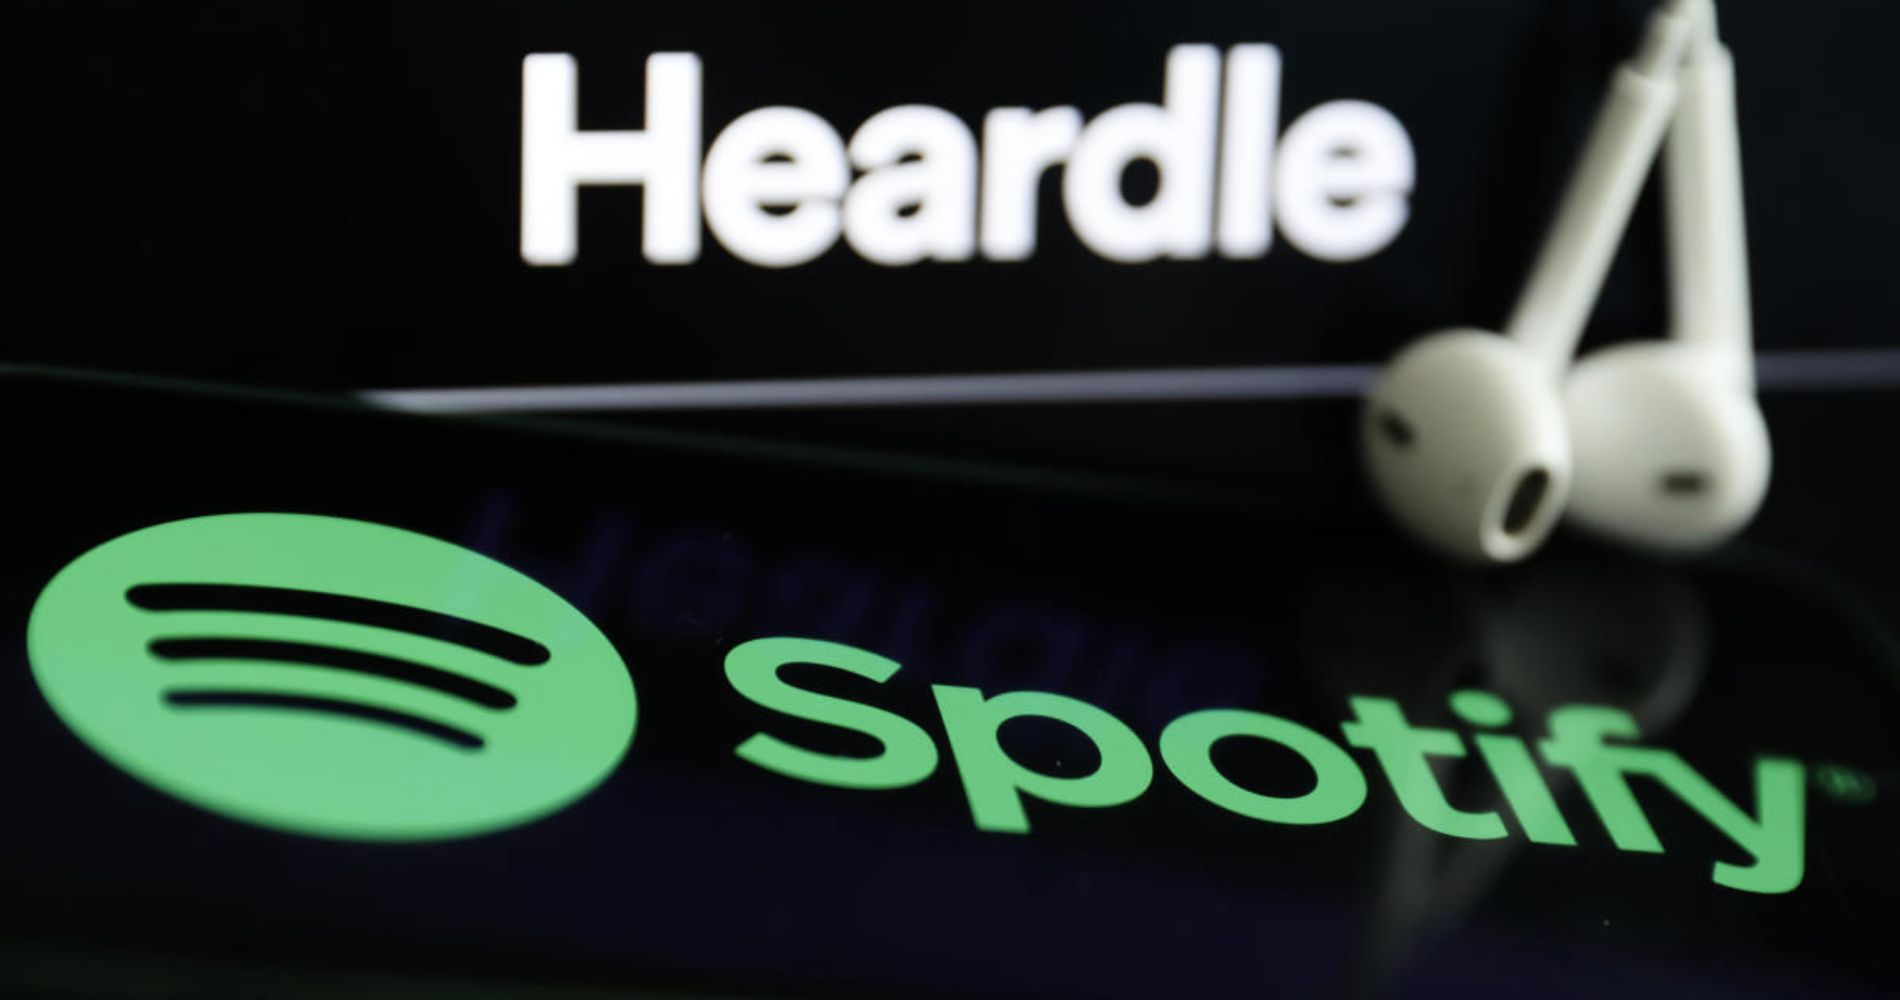 Spotify has announced that it has acquired an interactive music